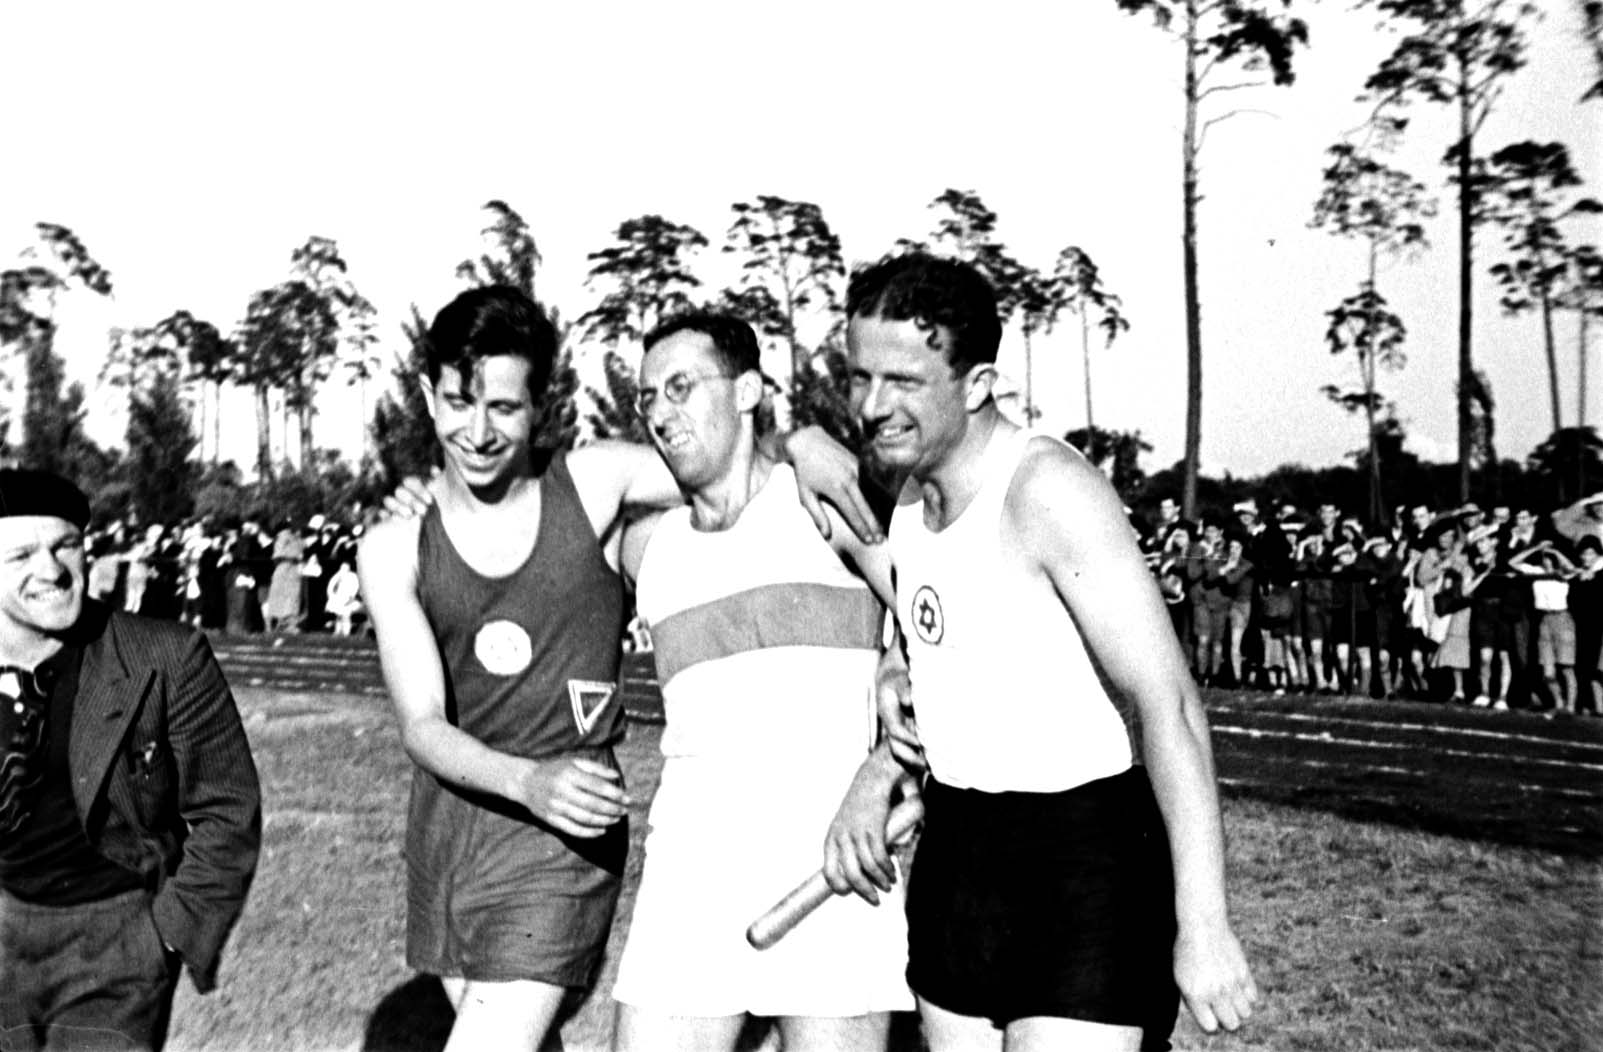 Berlin, Germany, 16 6 1935, Frankenstein, Dreyer and Orgler Track and field athletes at the Maccabi Berlin International Sports Day